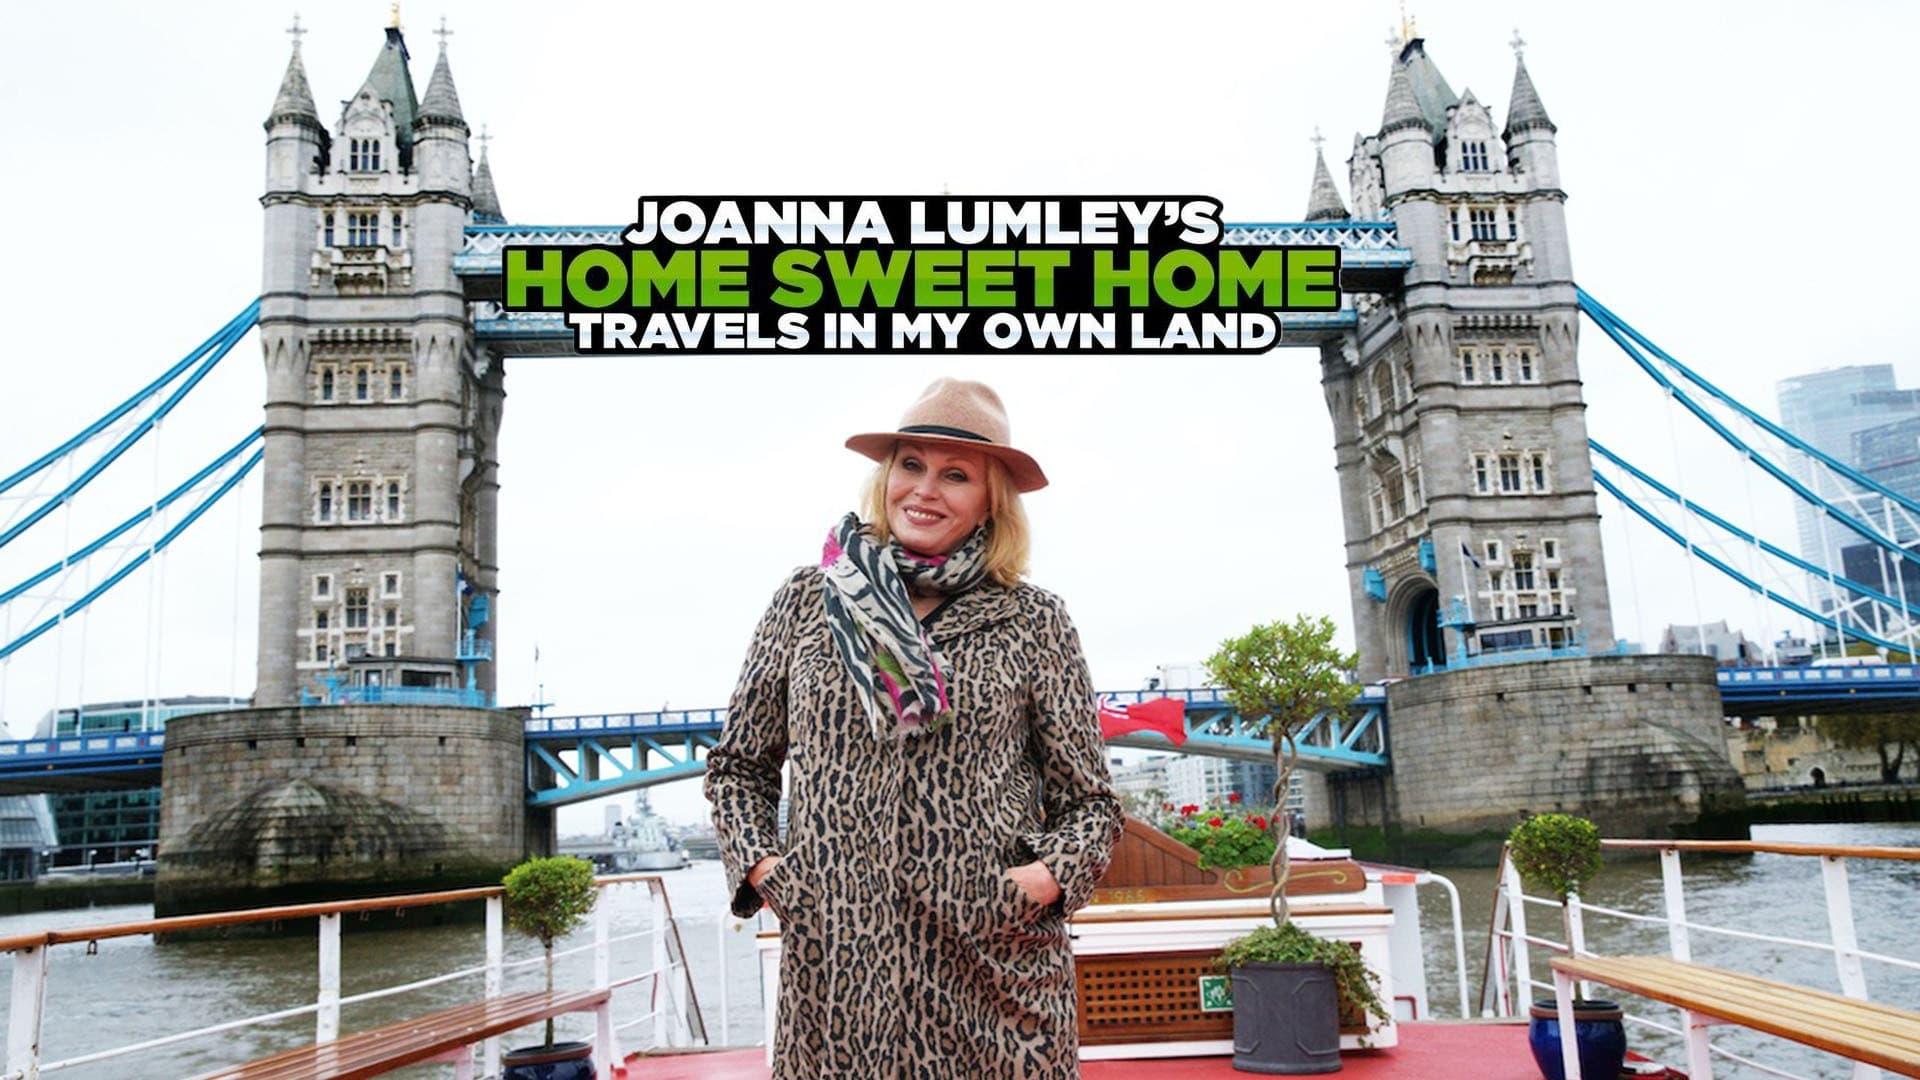 Joanna Lumley’s Home Sweet Home – Travels in My Own Land backdrop